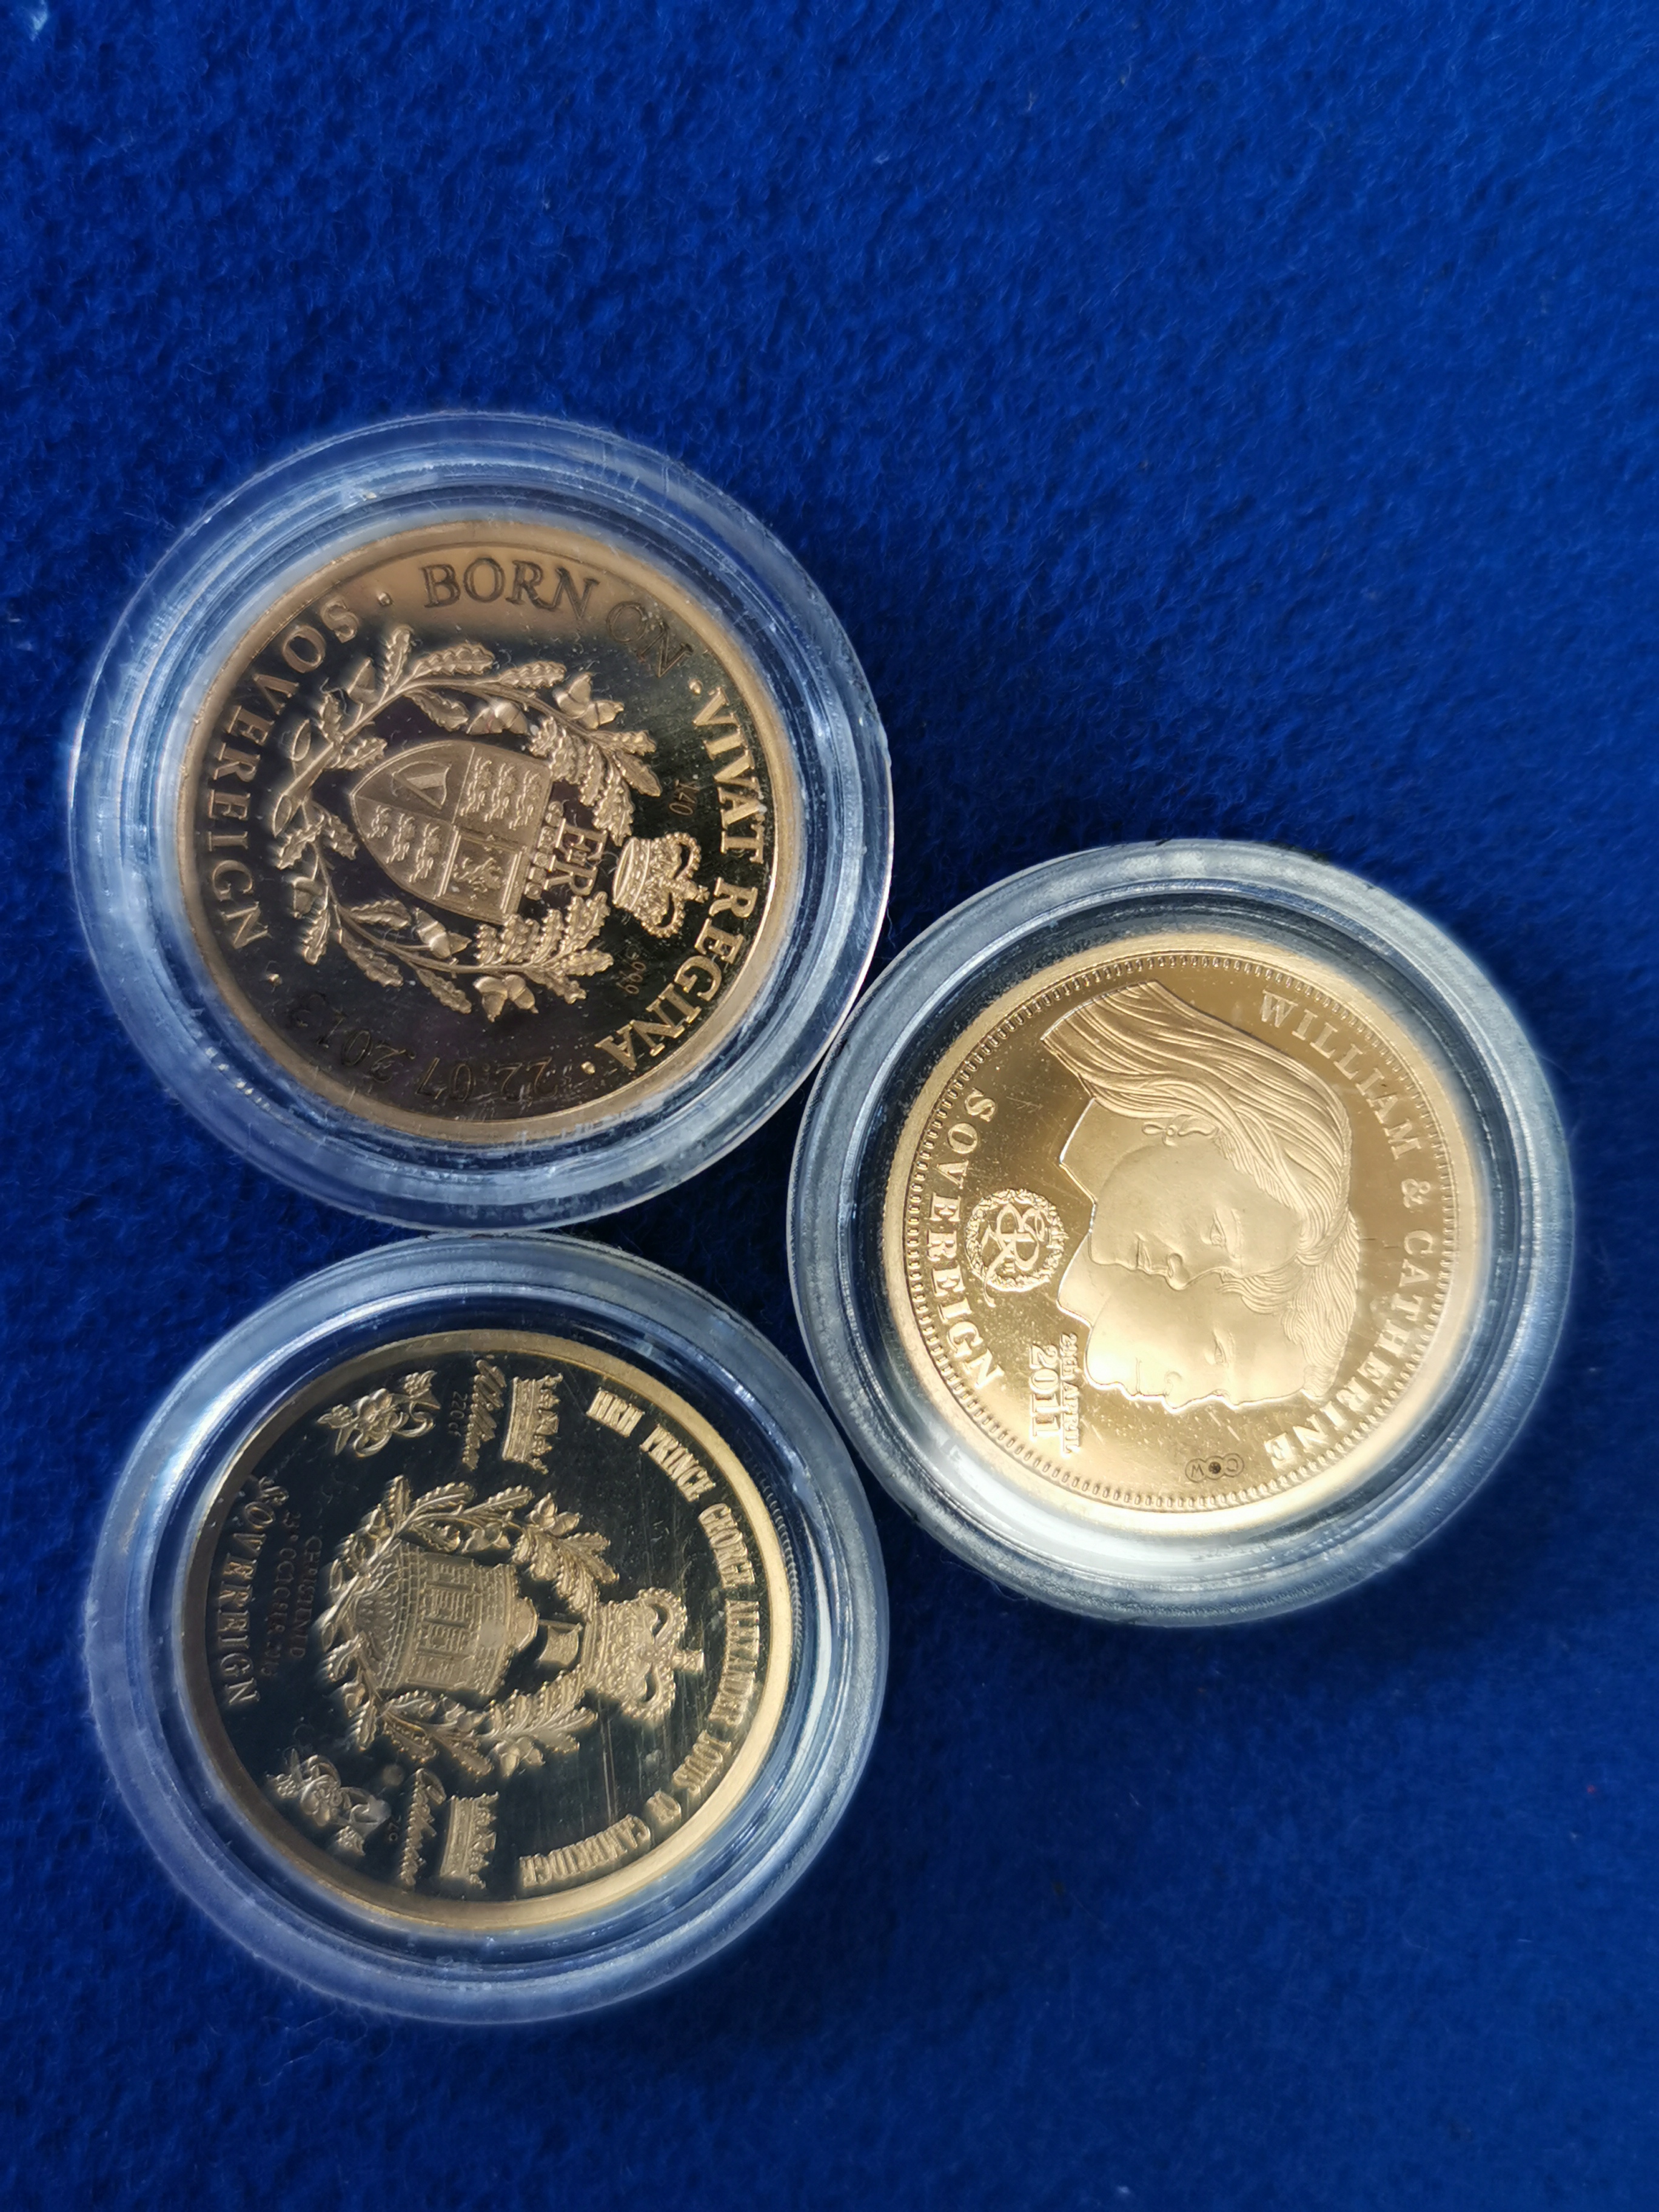 Boxed 2011 William & Catherine Gold Sovereign Coin 9g, & Two 2013 Gold Sovereign Coins - 27g total - Image 3 of 3